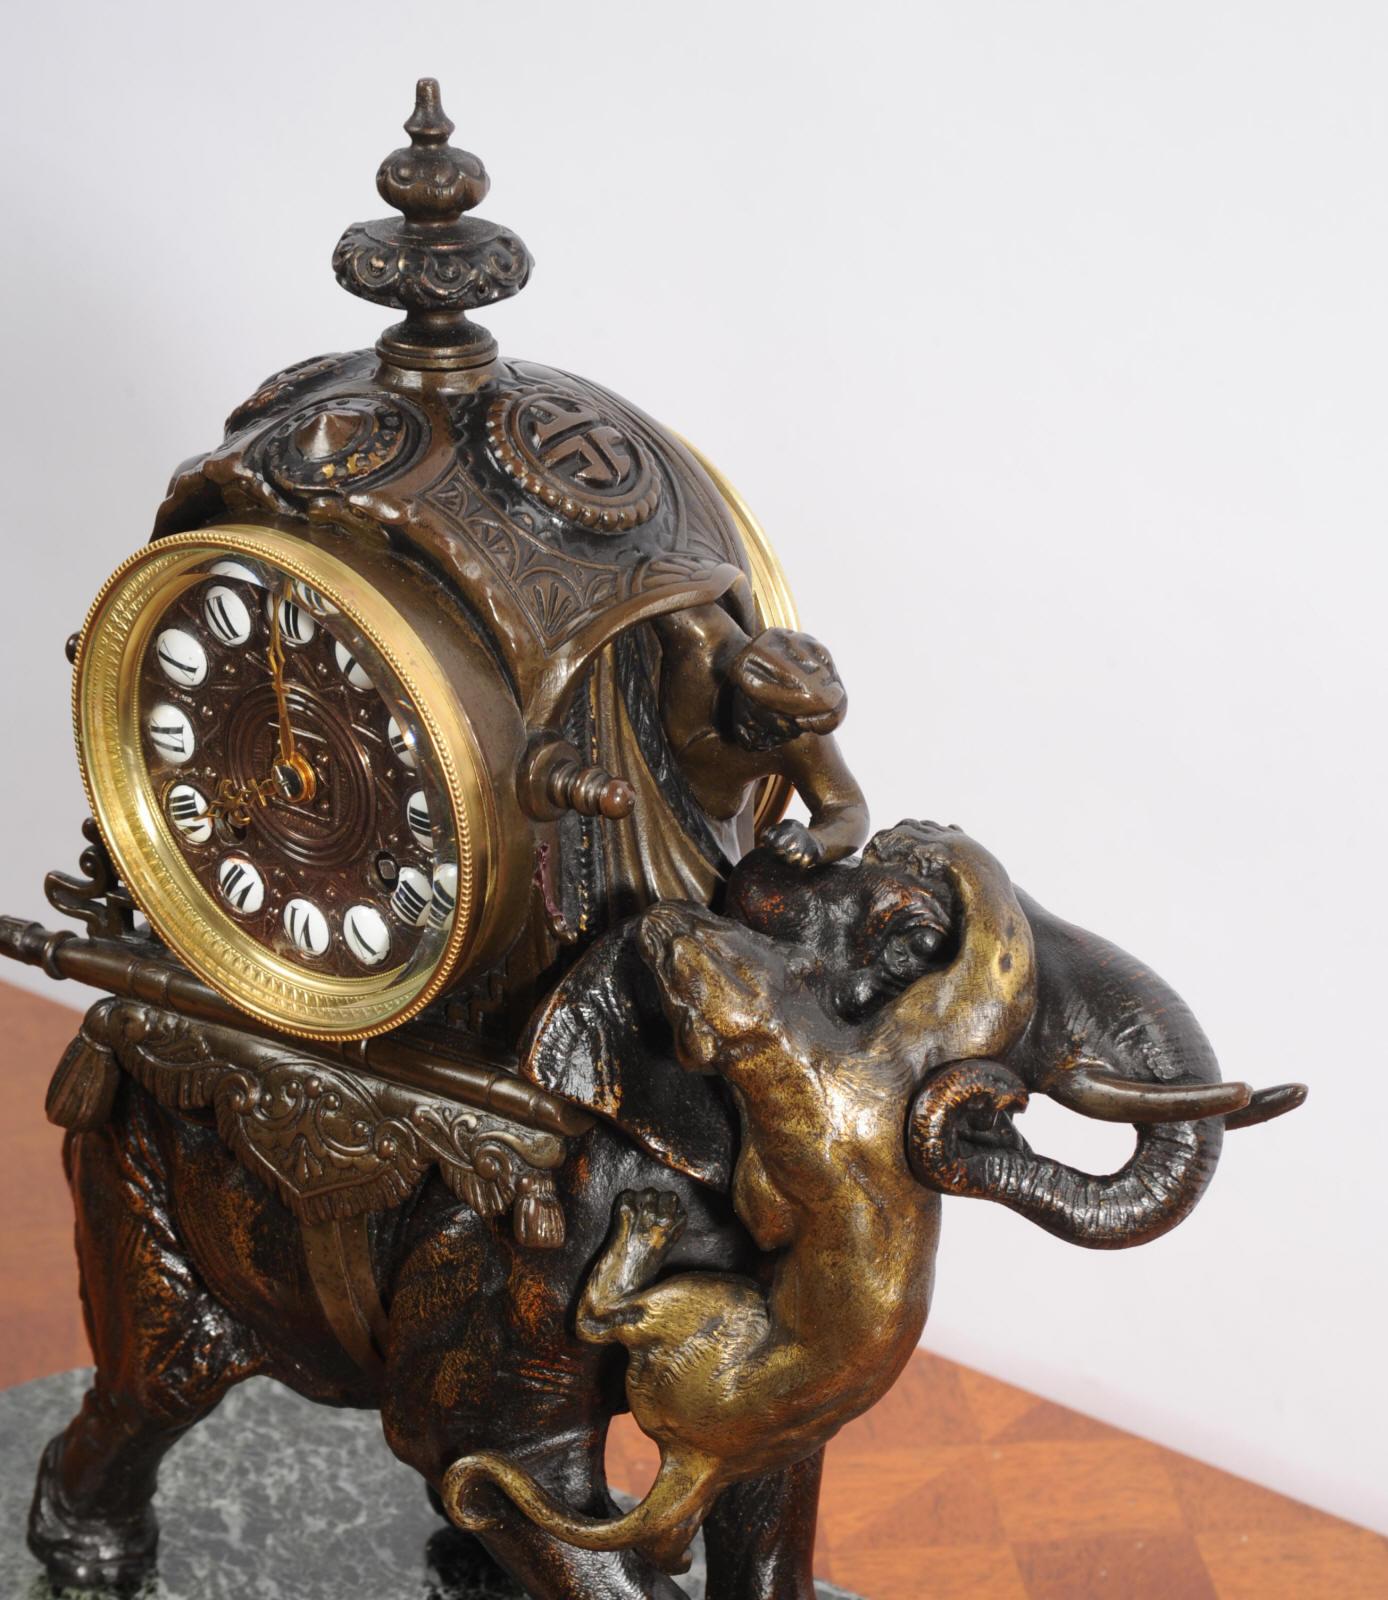 Antique French Clock - Elephant - The Mahout Fending Off A Tiger 1